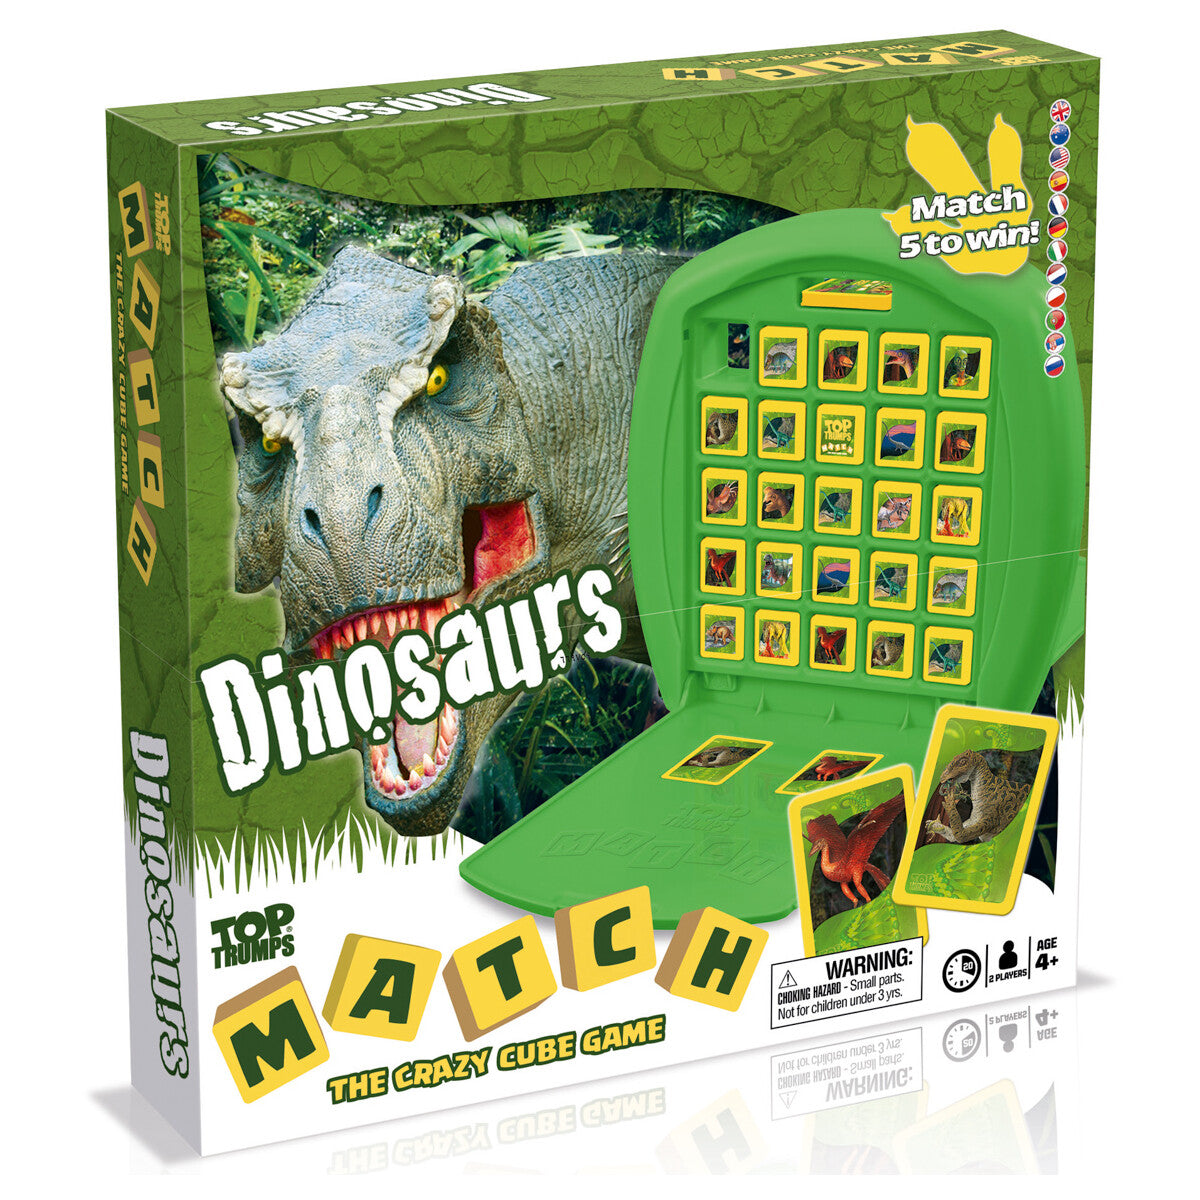 View the best prices for: dinosaurs top trumps match game